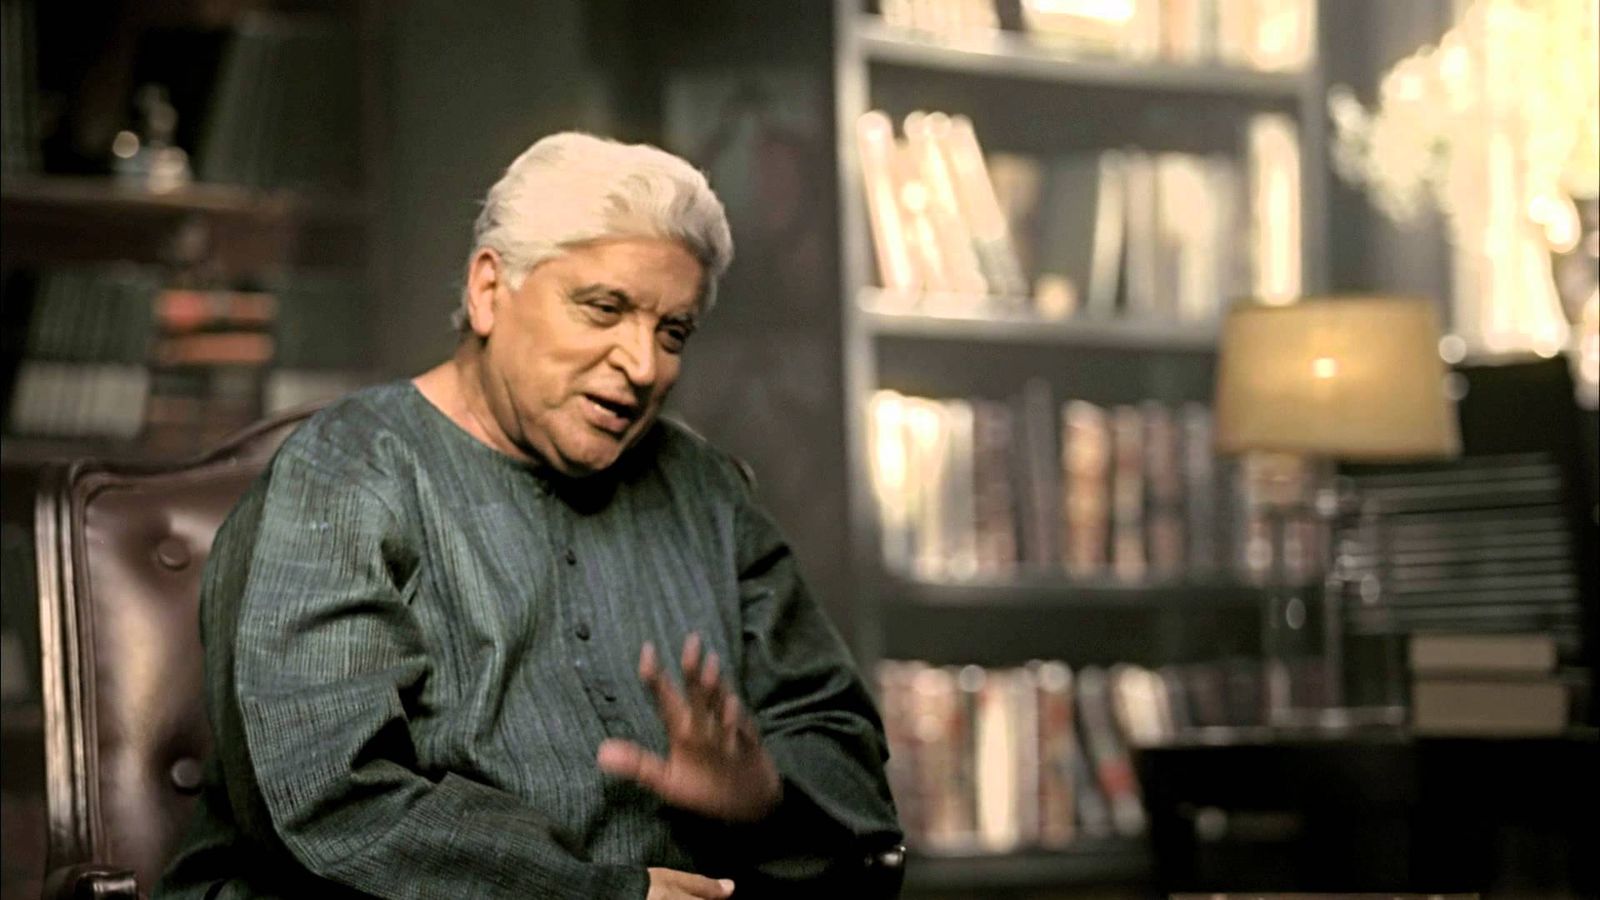 12 Songs By Javed Akhtar Which Will Stay Evergreen!